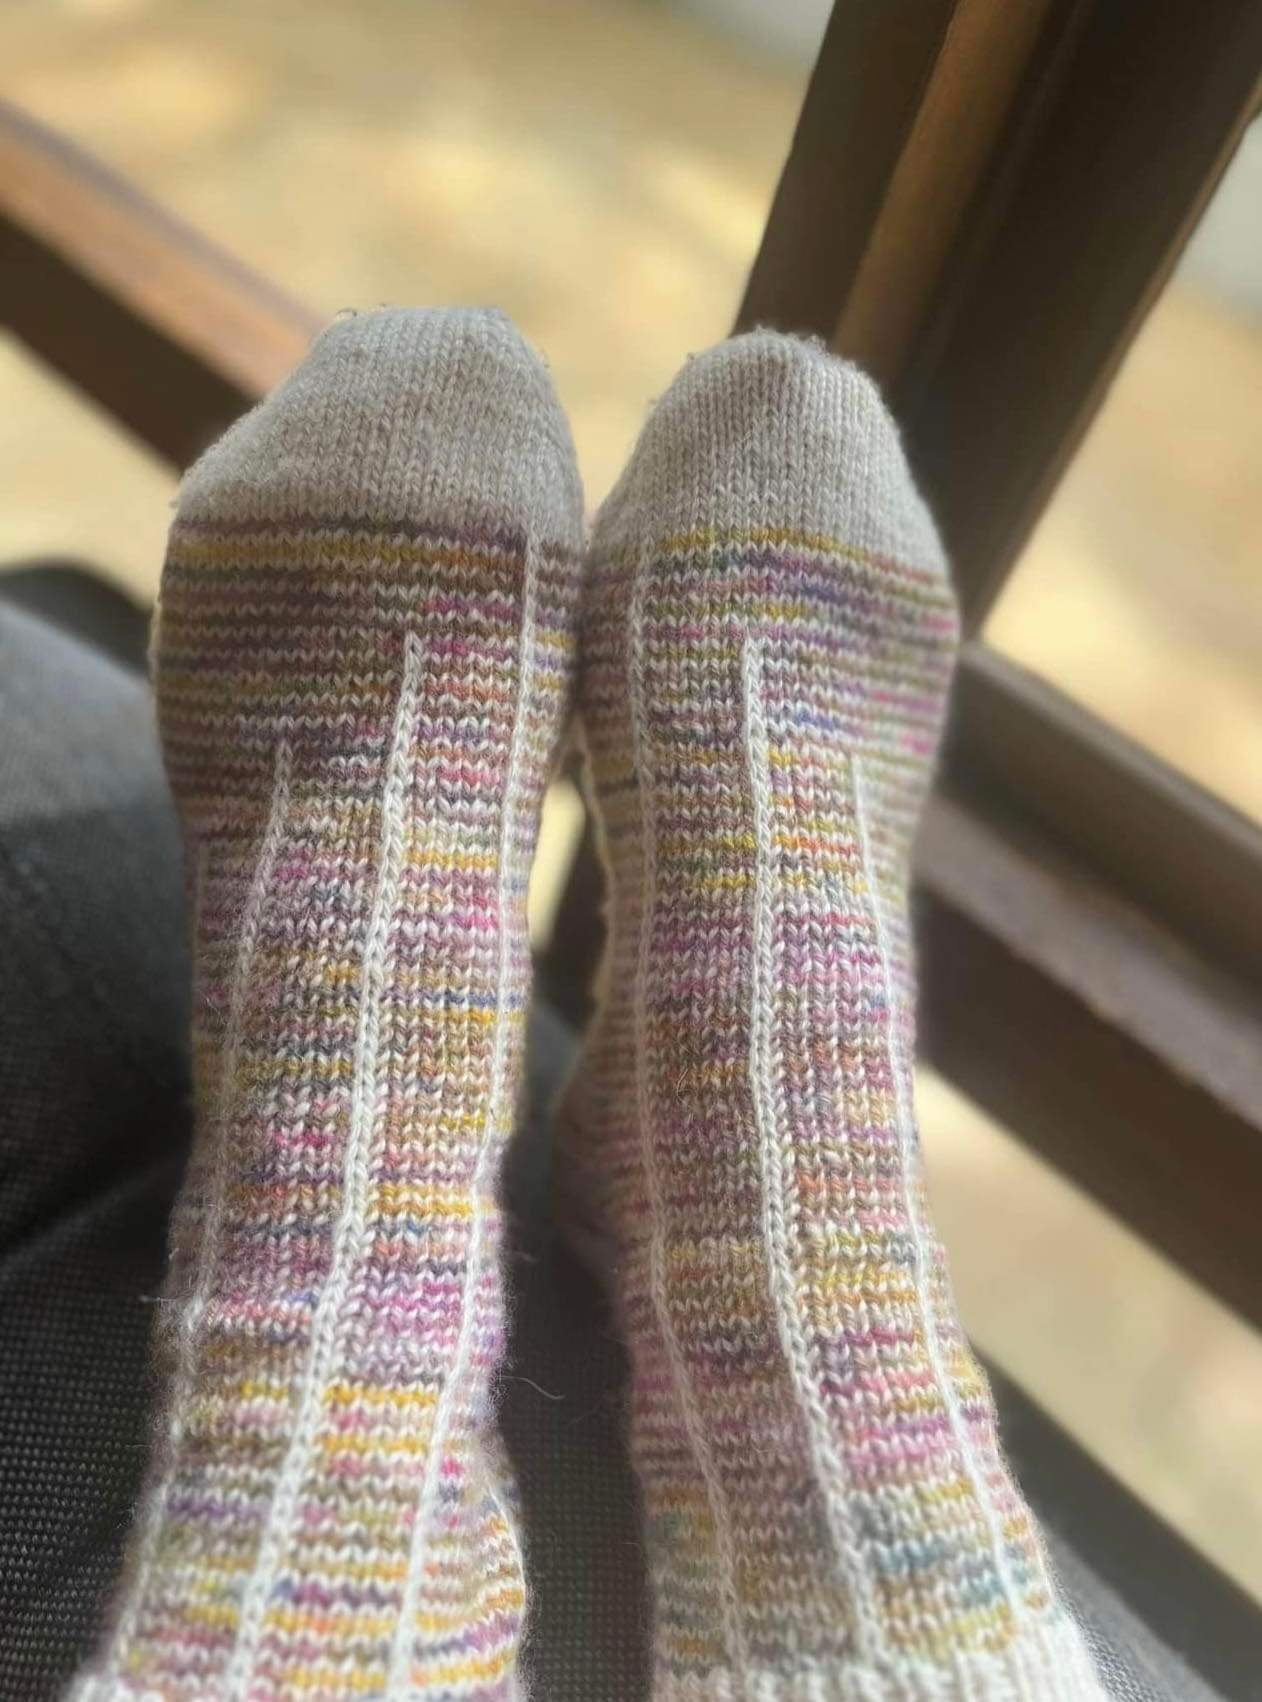 Learn to Knit Socks from the Toe Up Class